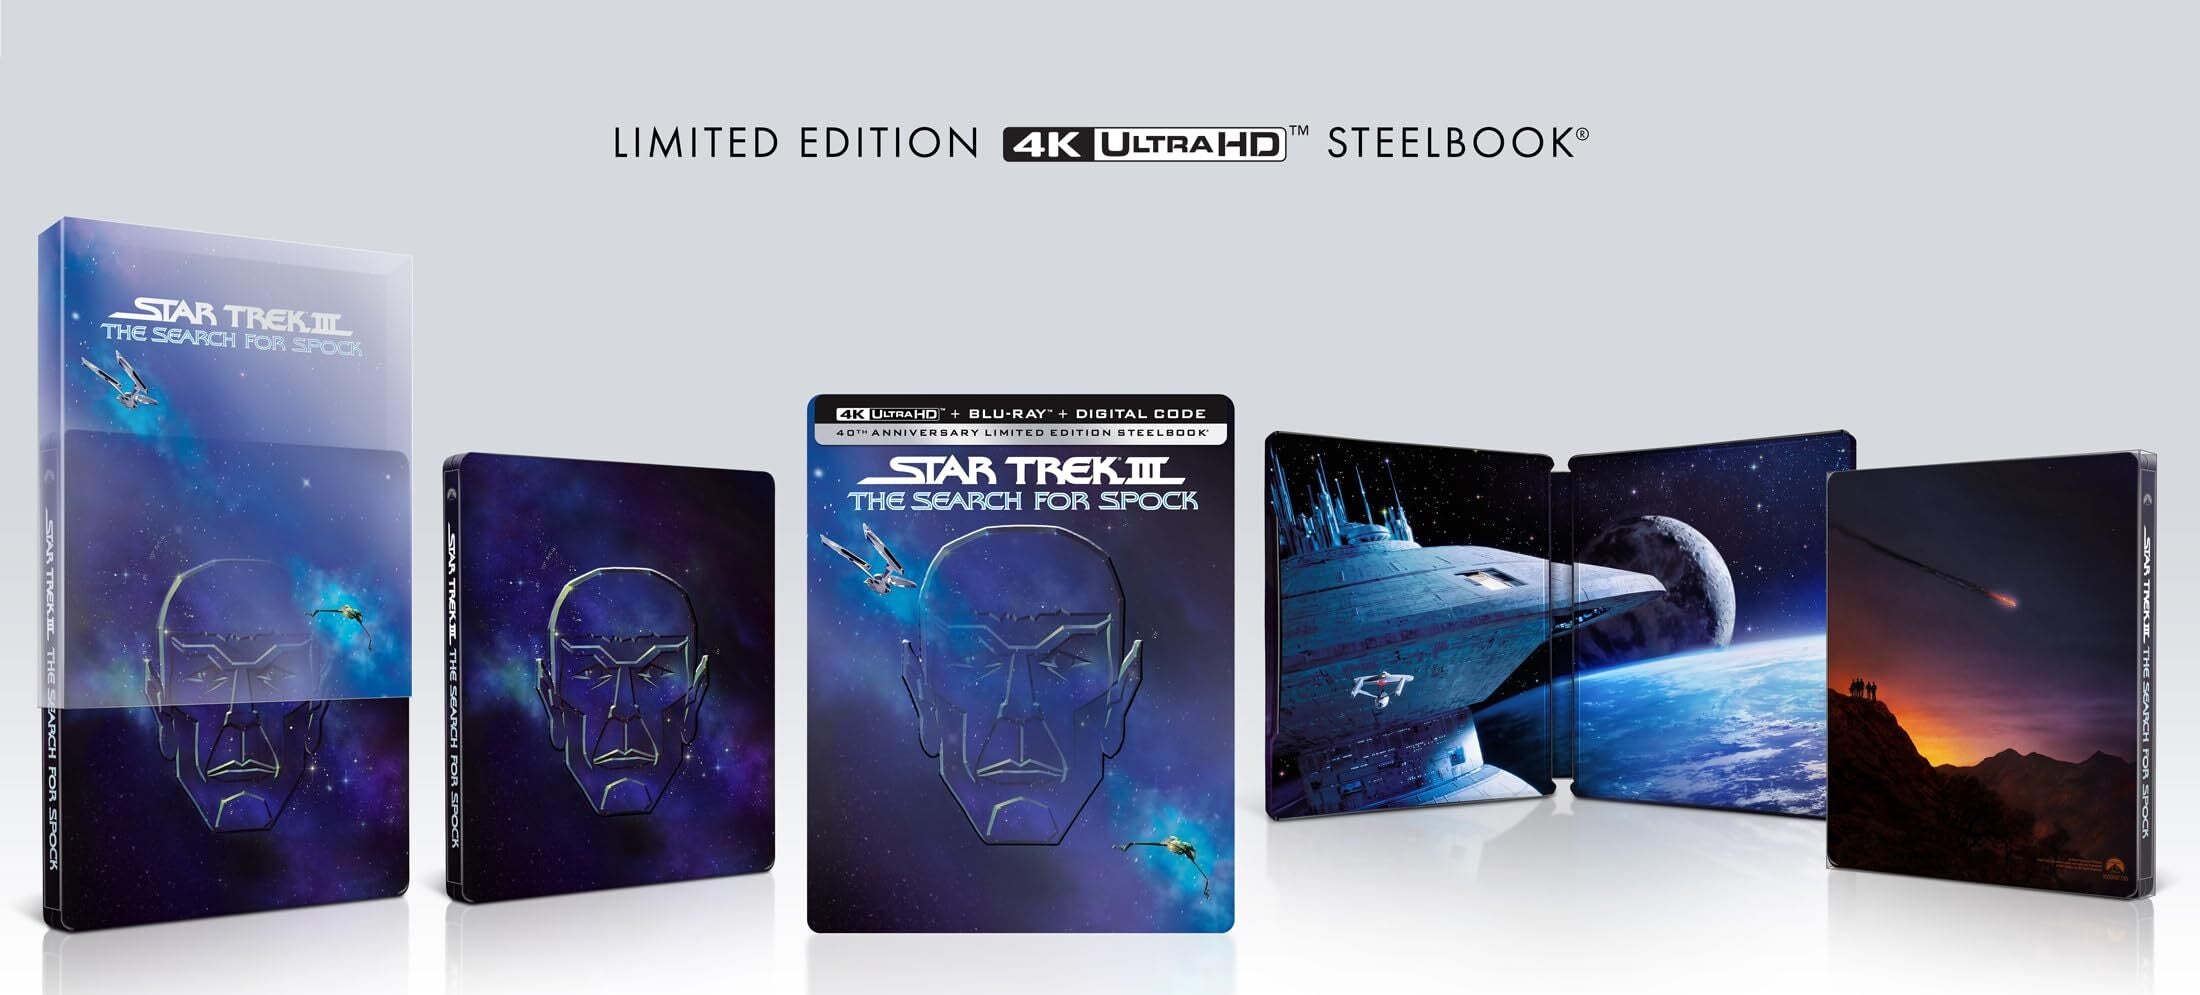 STAR TREK III: THE SEARCH FOR SPOCK (LIMITED EDITION) 4K UHD/BLU-RAY STEELBOOK [PRE-ORDER]